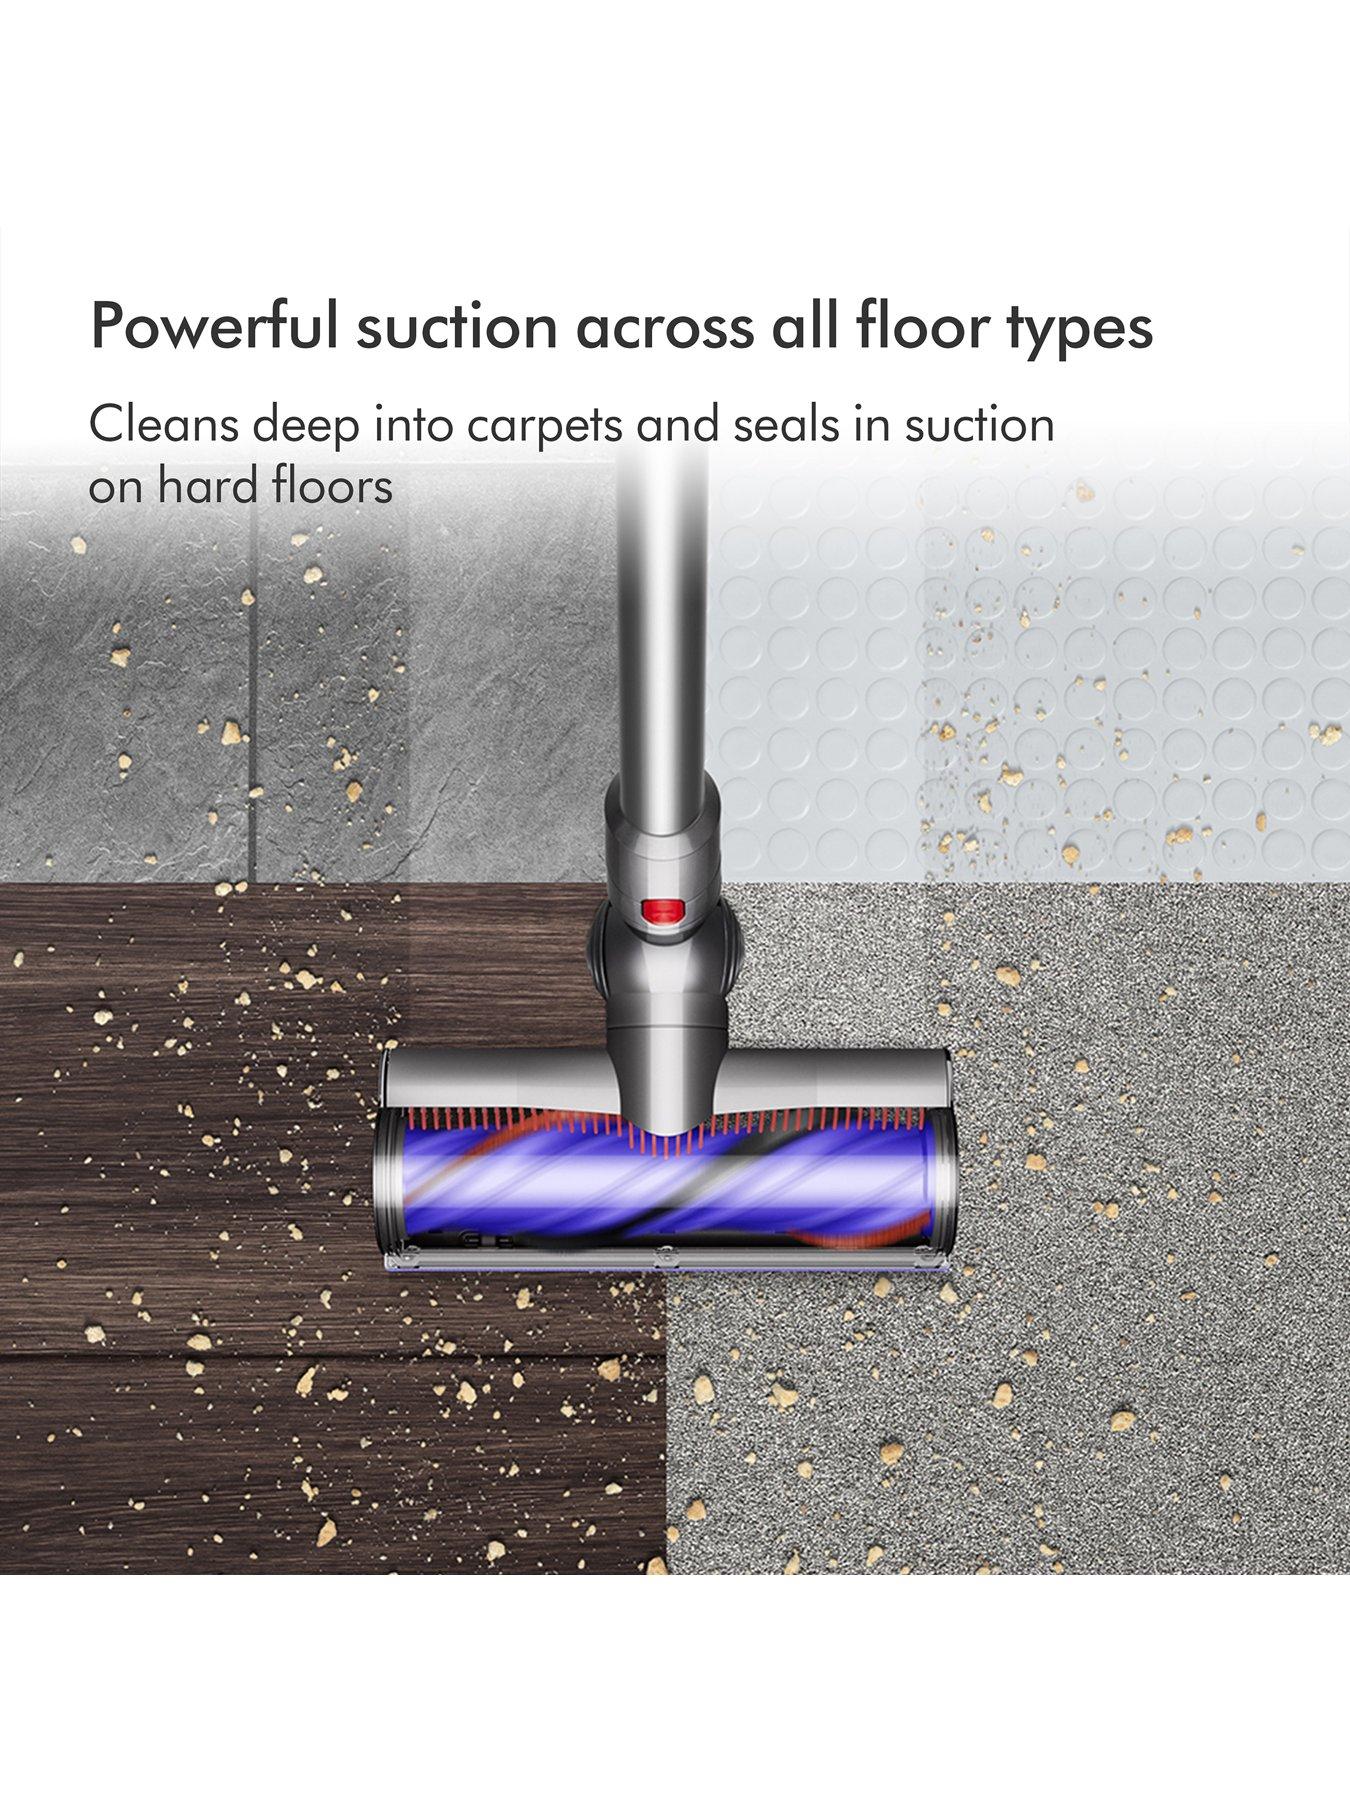 Dyson V8 Cordless Vacuum with 5 Extra Accessories & Reviews